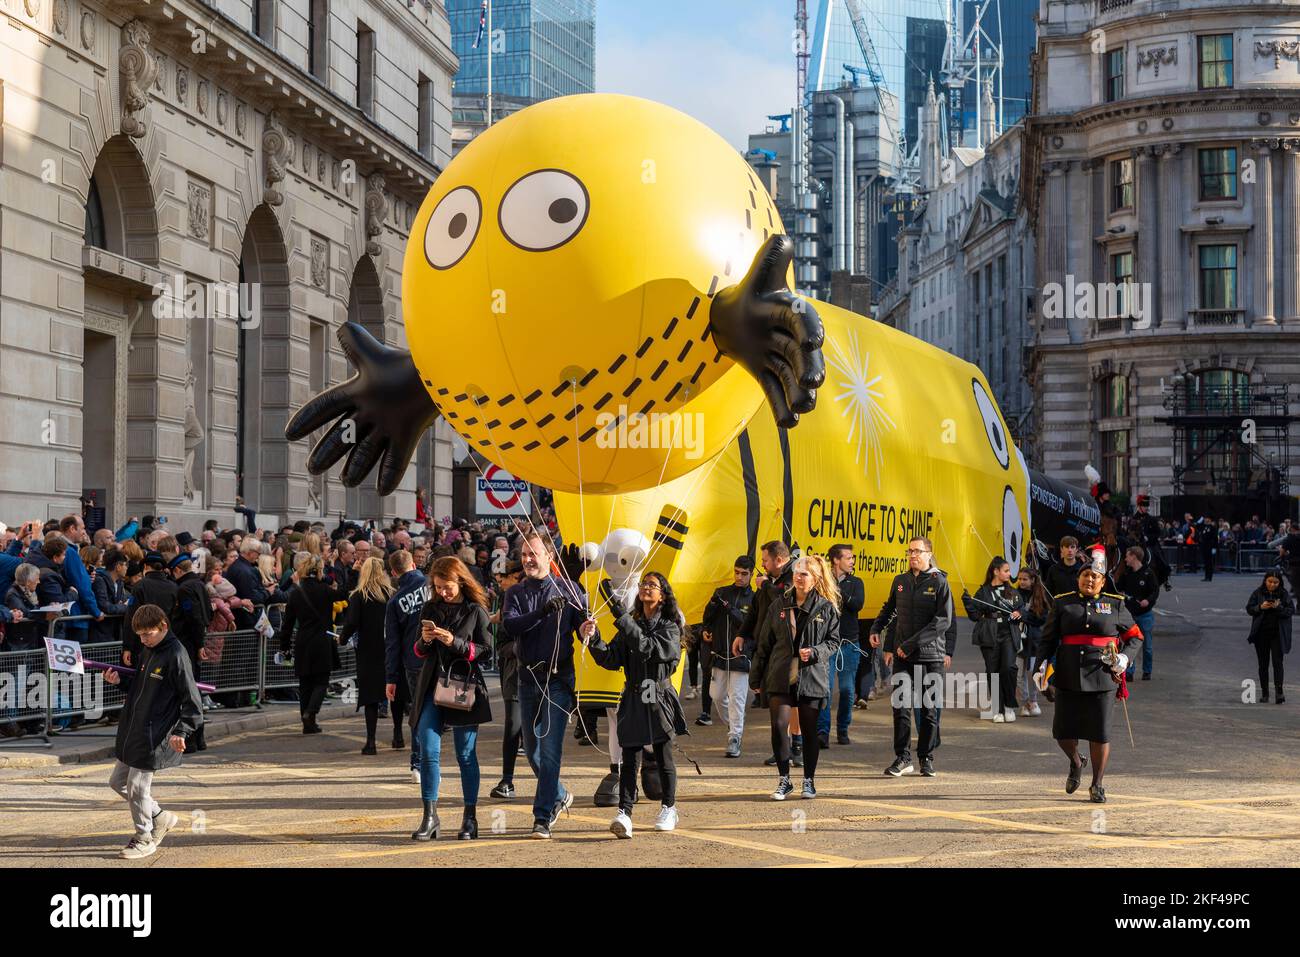 Miller Insurance inflatables, a chance to shine, at the Lord Mayor's Show parade in the City of London, UK. Cricket bat and ball inflatables Stock Photo